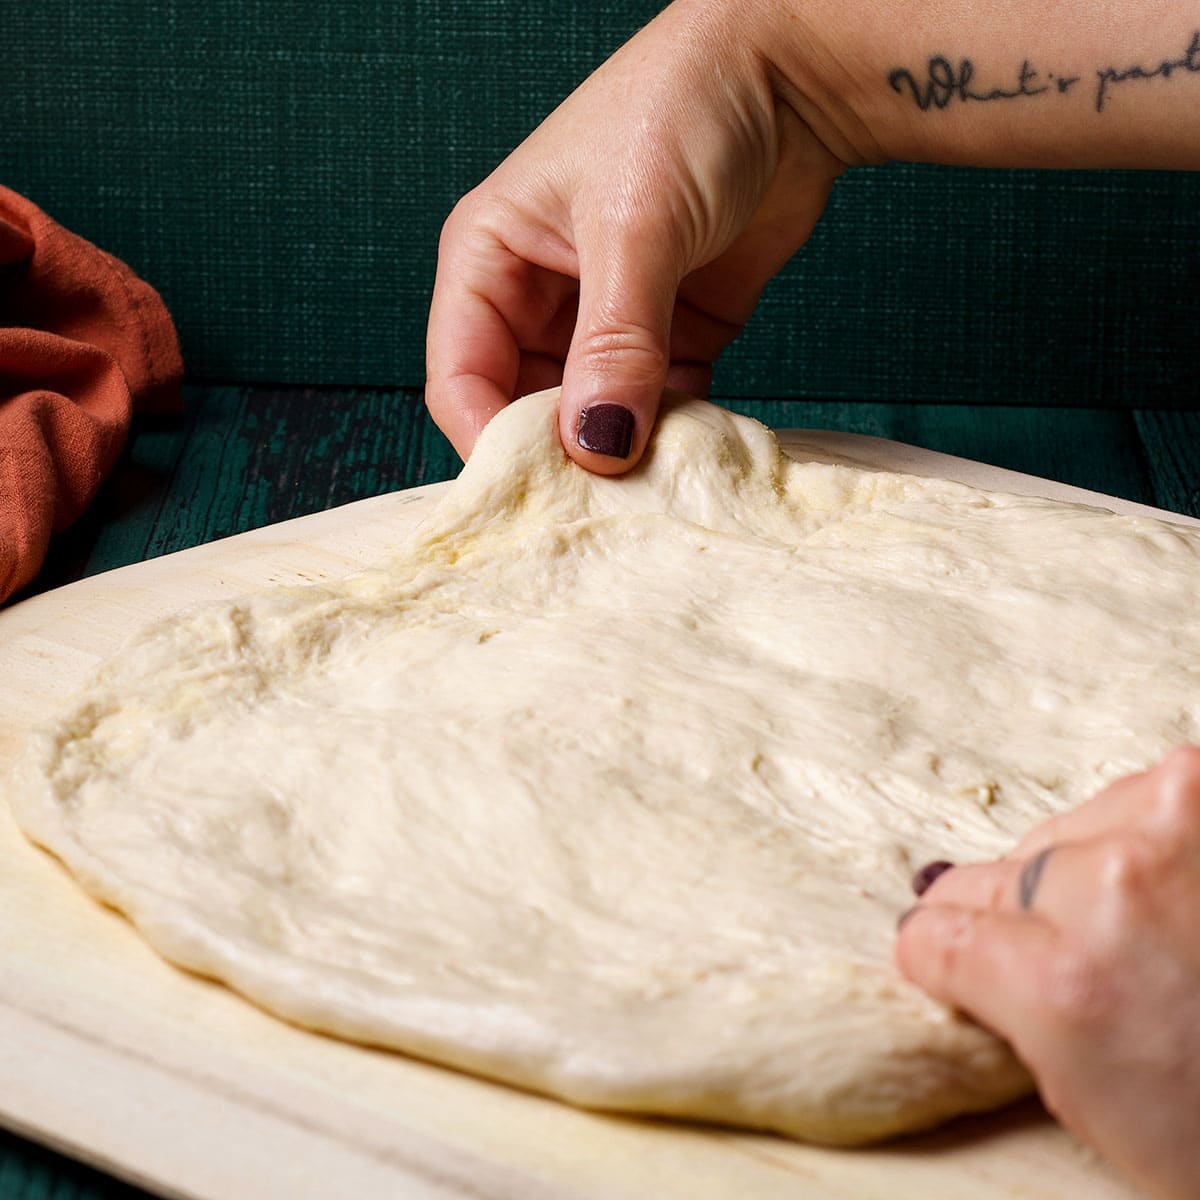 Stretching pizza dough across a pizza peel that's been dusted with semolina flour.